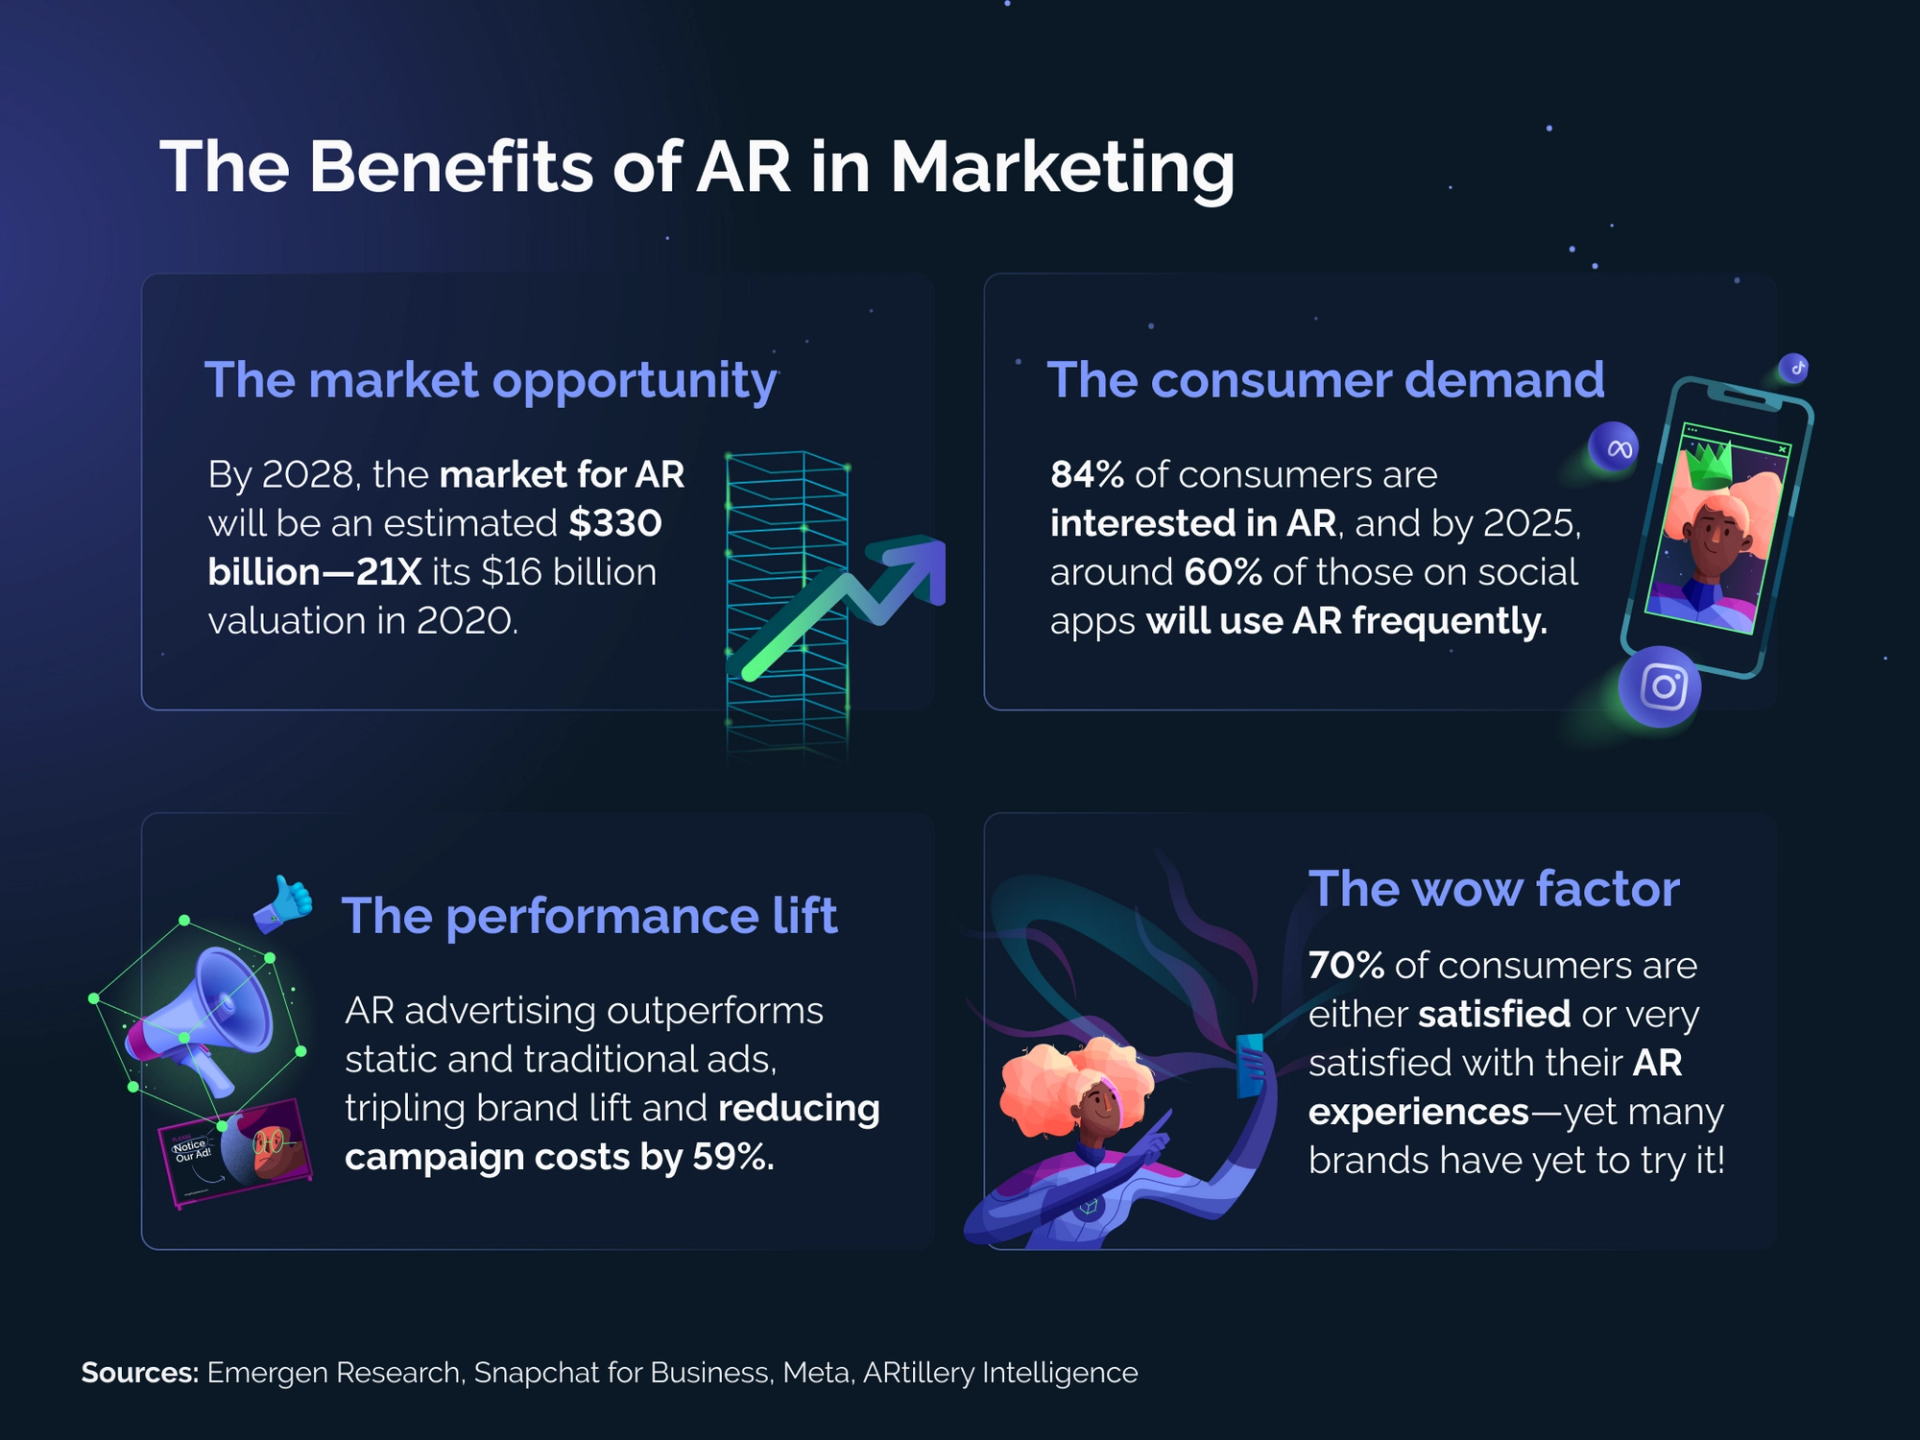 The benefits of AR in marketing